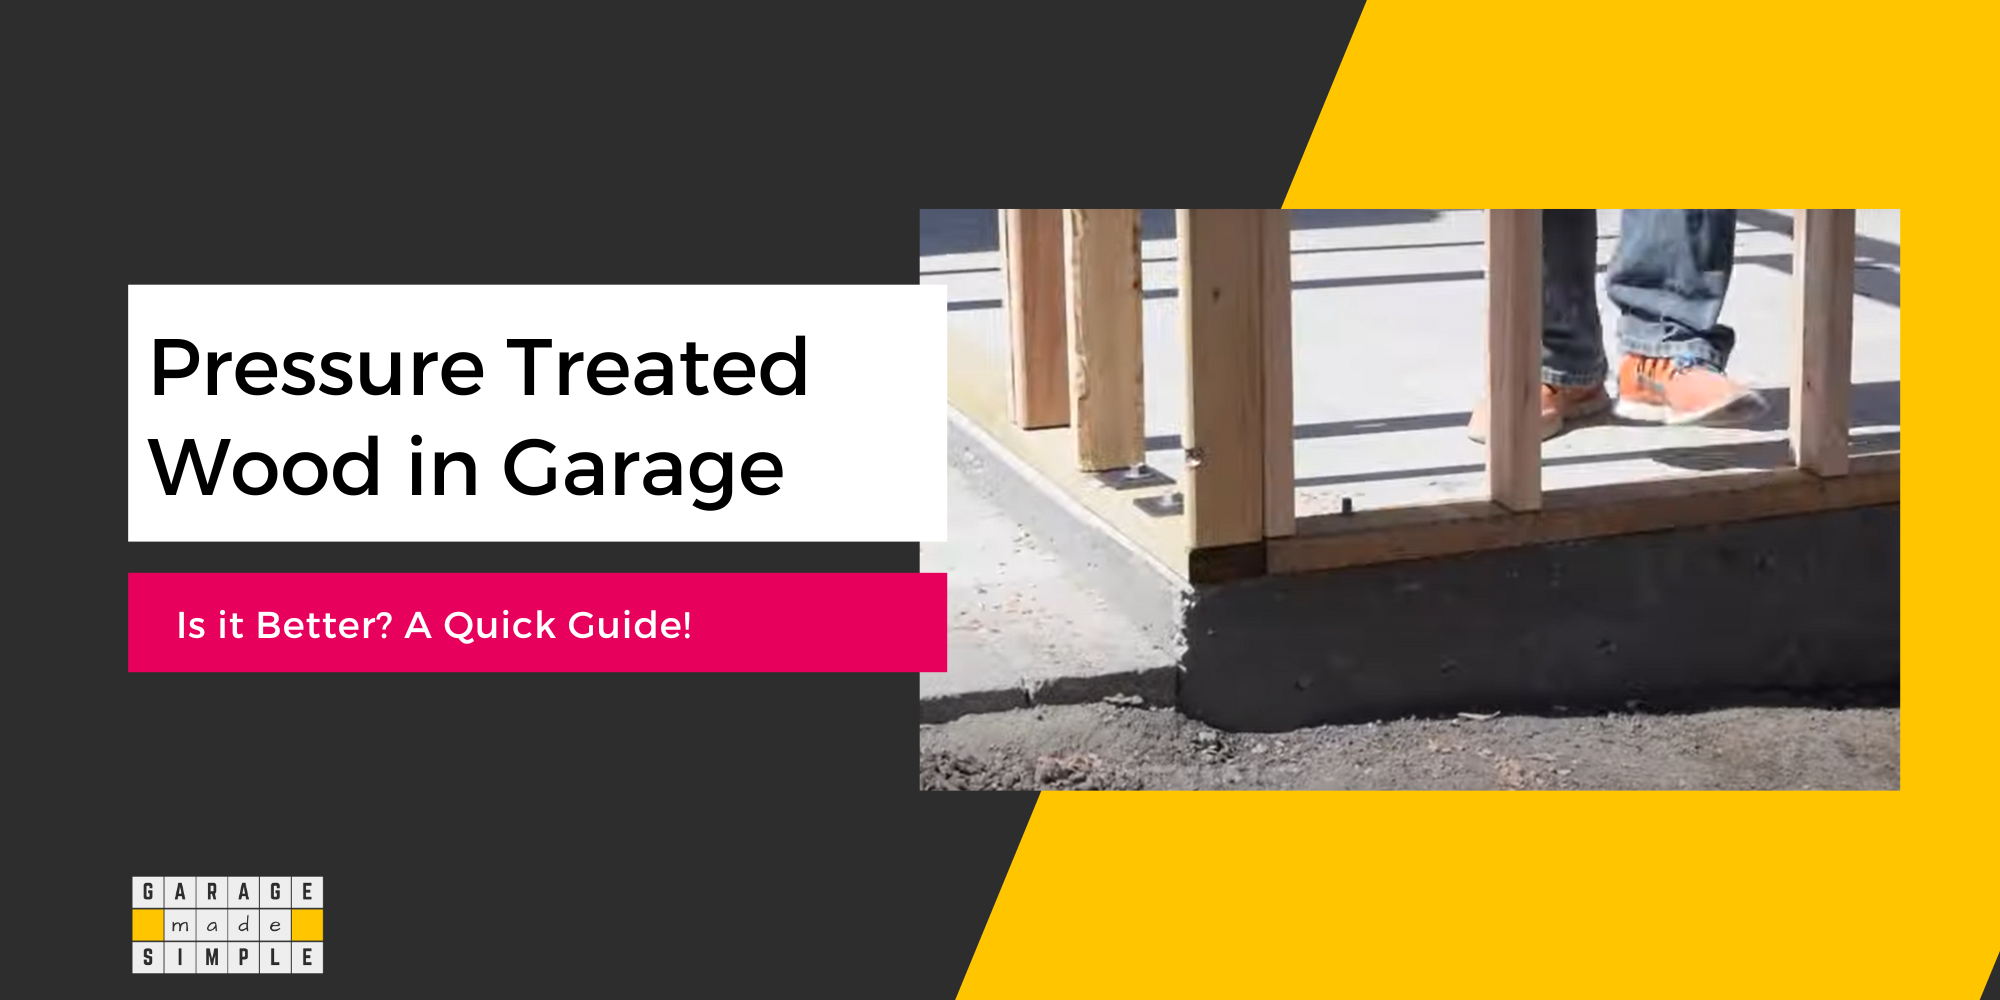 Pressure Treated Wood in a Garage: Is it Better? A Quick Guide!